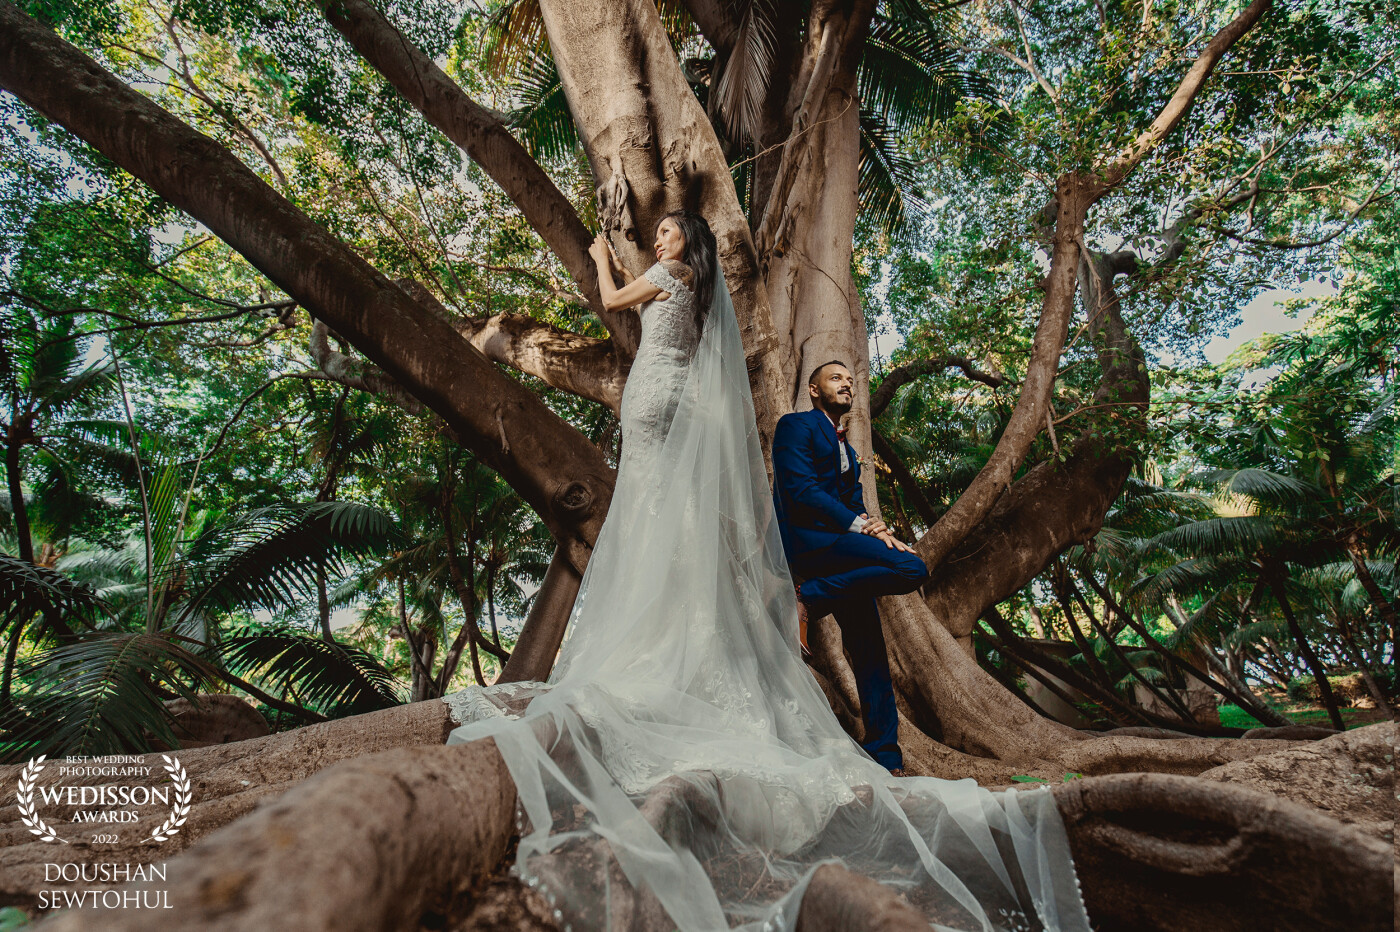 The Wedding Dress of any bride is unique. All brides love to showcase the beauty of their dresses.  So did Melaniee. The enormous tree and interlocking roots were also very important for this composition. The groom, David, creates the perfect balance with his presence.<br />
<br />
Ad600pro<br />
5d Mark IV